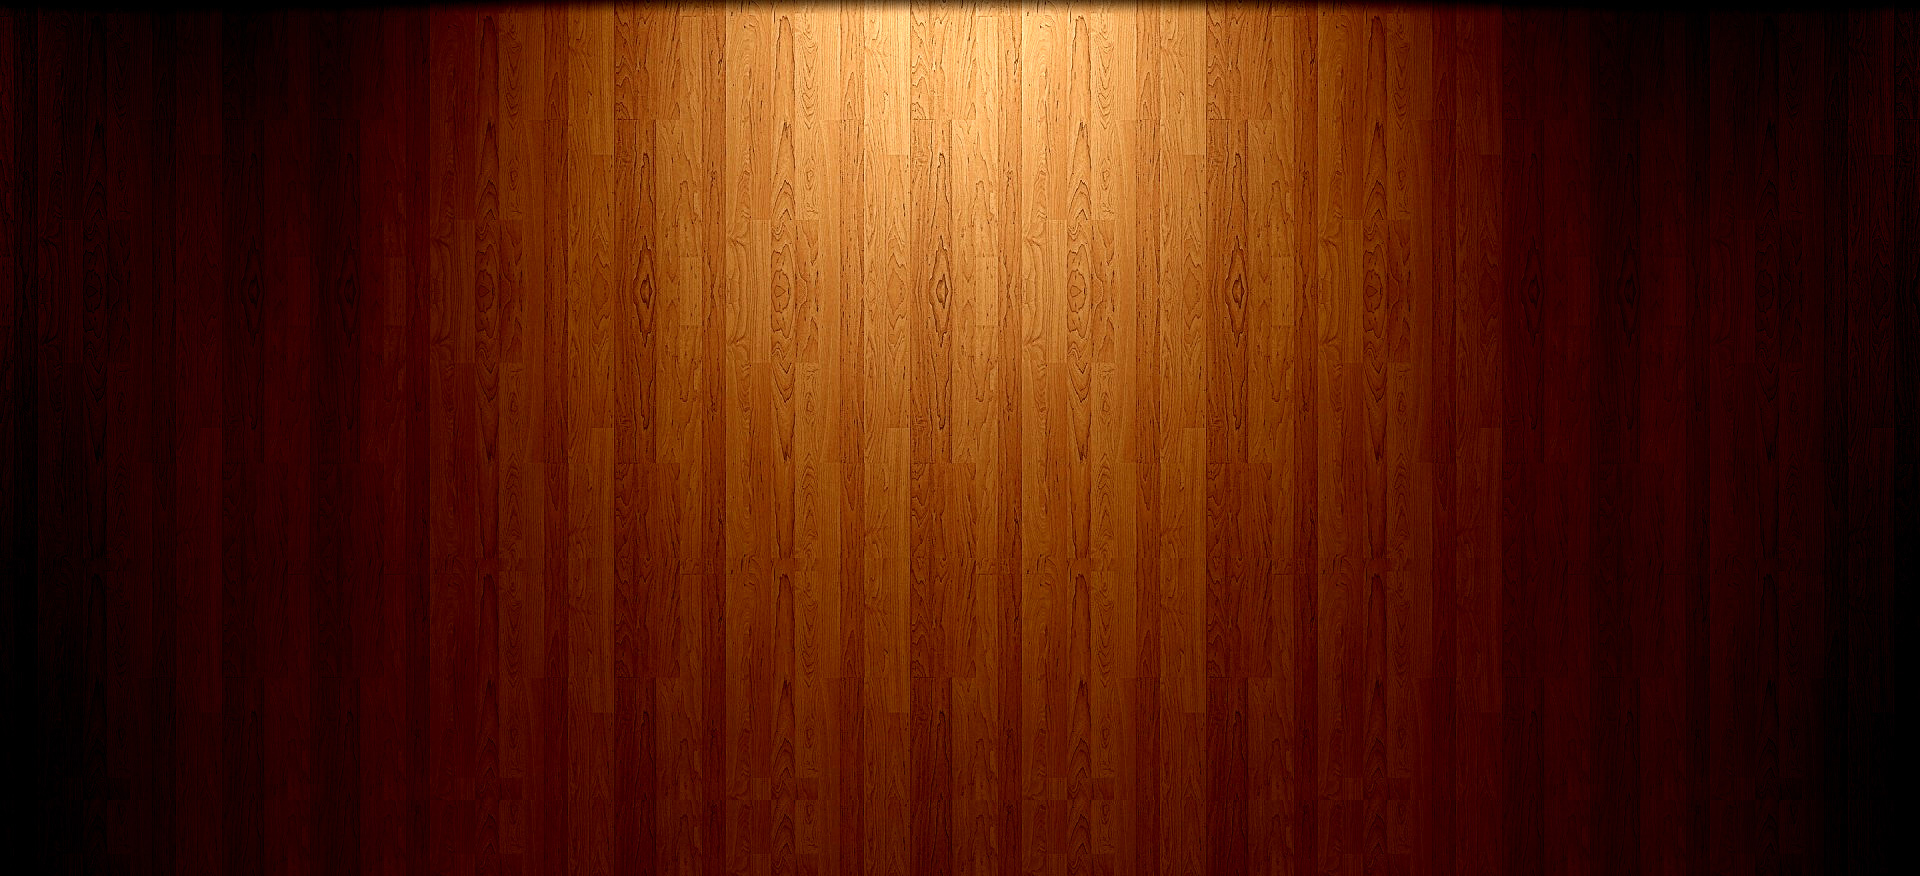 Carvells Woodworks Coupon Page Wood Panel Background